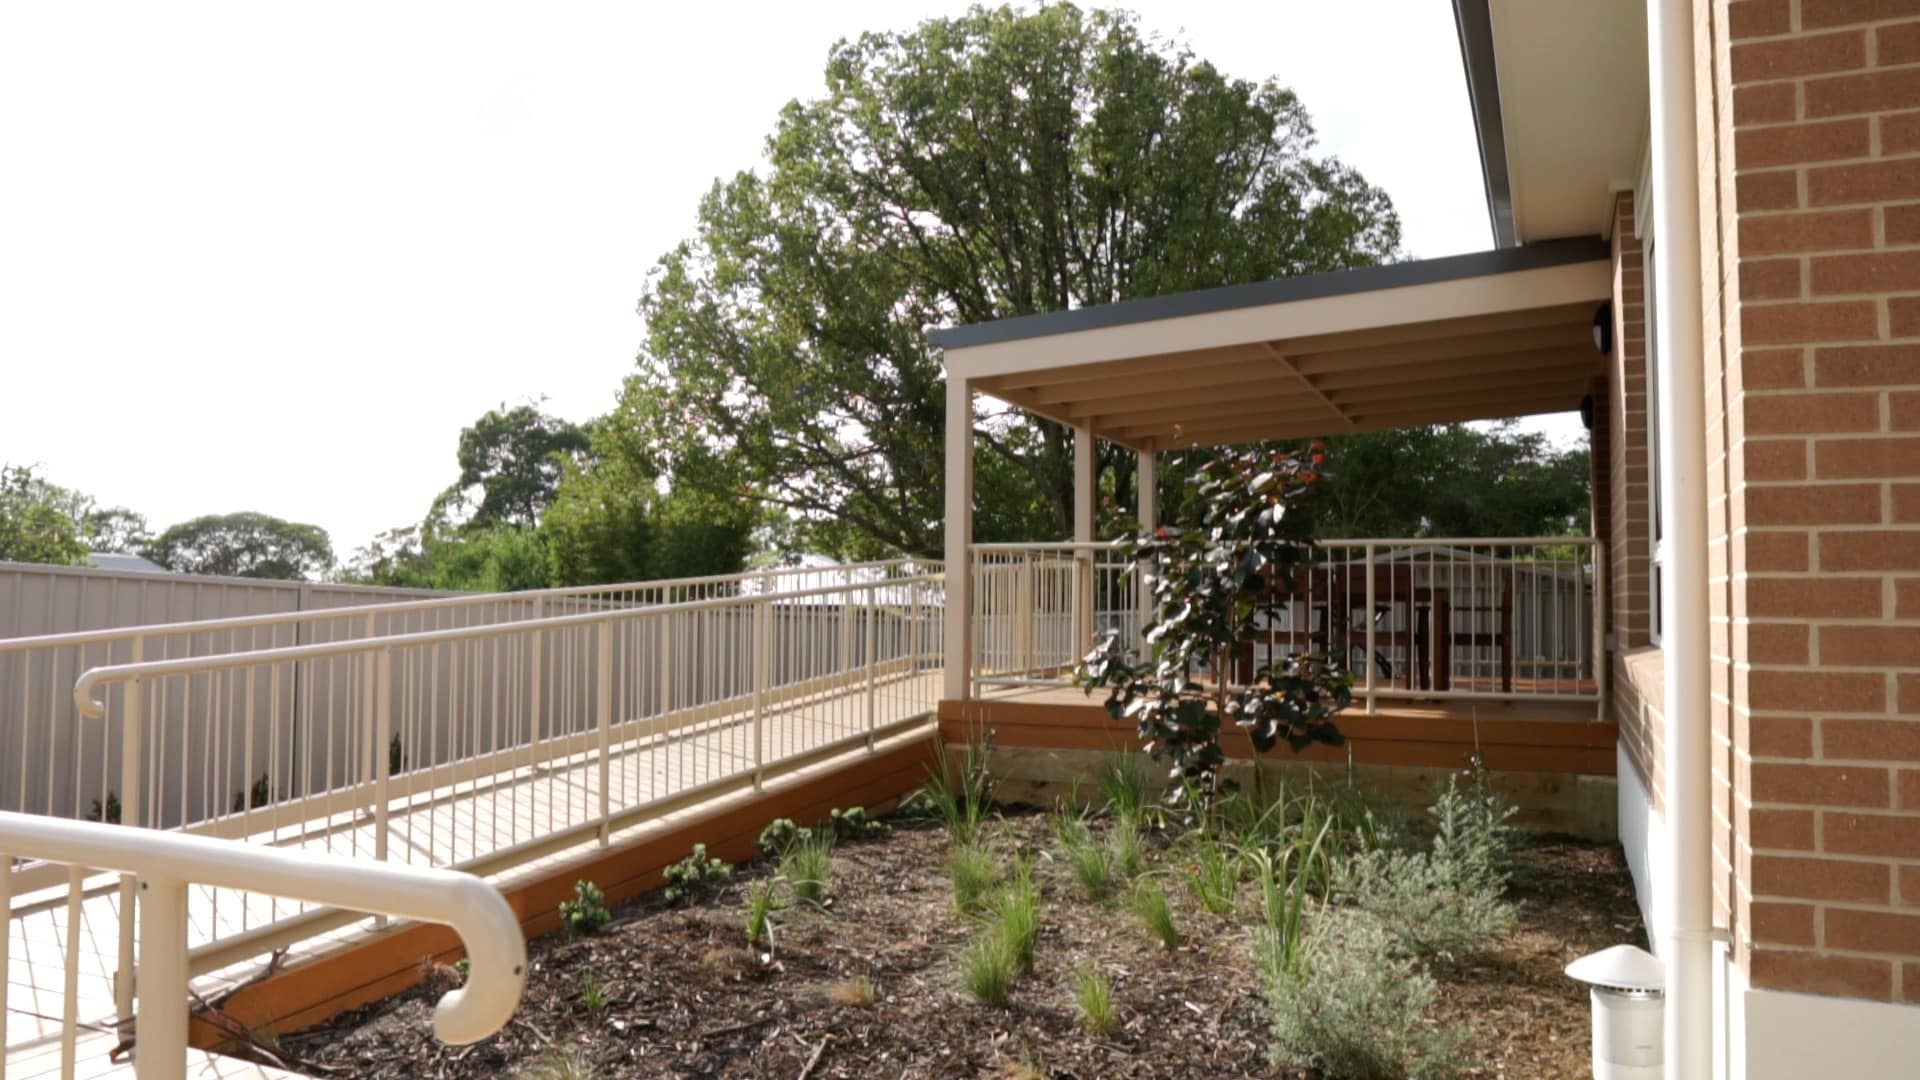 A ramp leading up to an undercover outdoor area at the Lambton 2 property